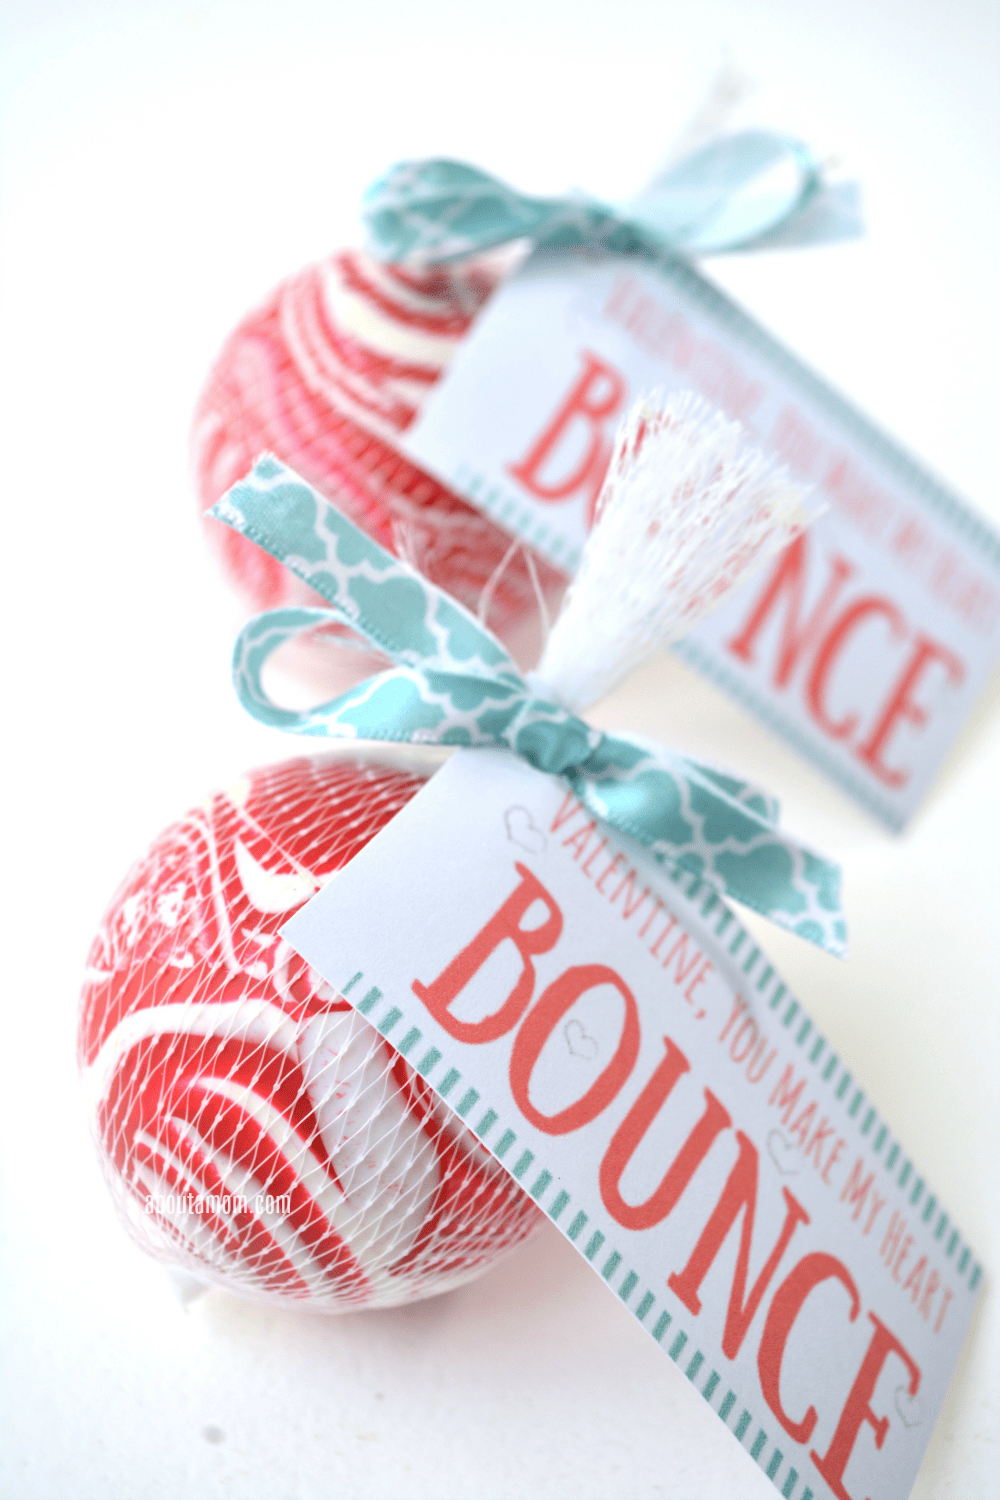 "You Make My Heart Bounce" printable Valentines are so much fun, and kids will enjoy the bouncy ball. They are inexpensive and incredibly simple to make. 